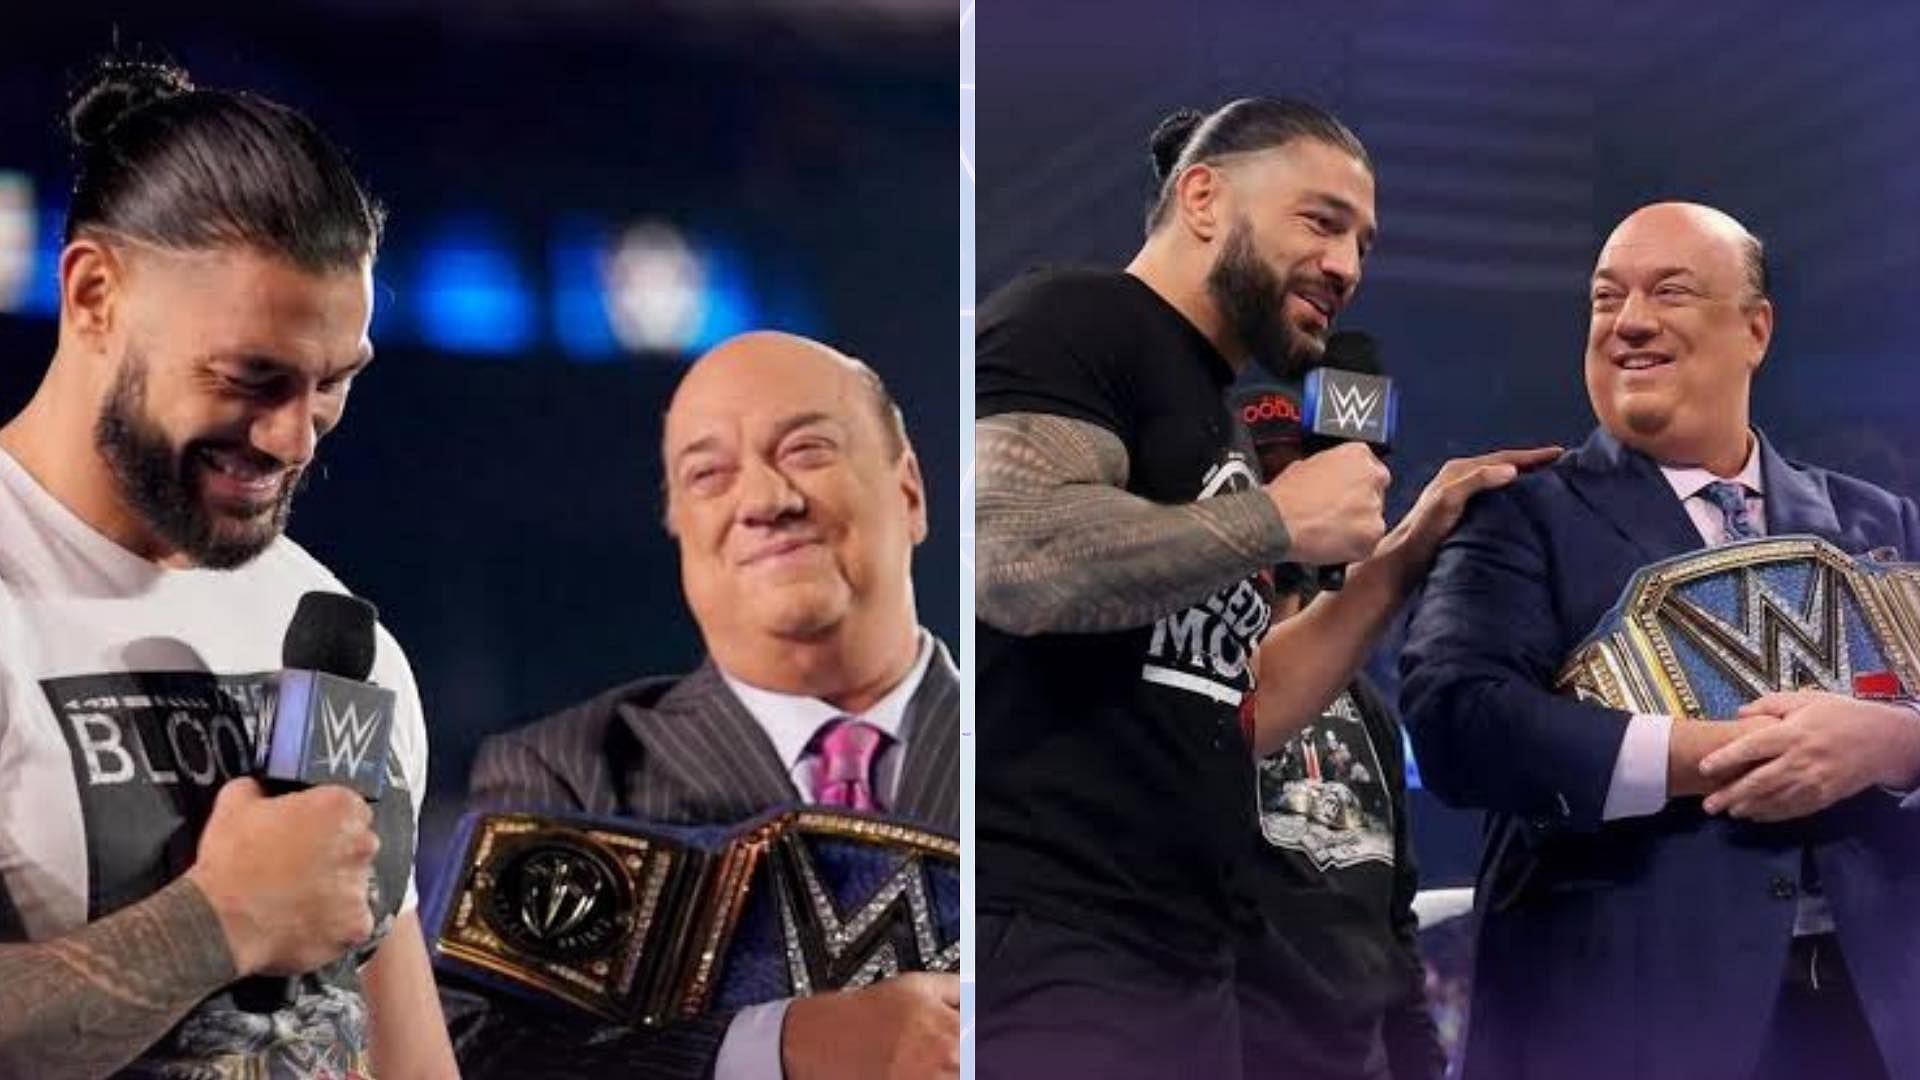 Roman Reigns and Paul Heyman have known each other for a long time.